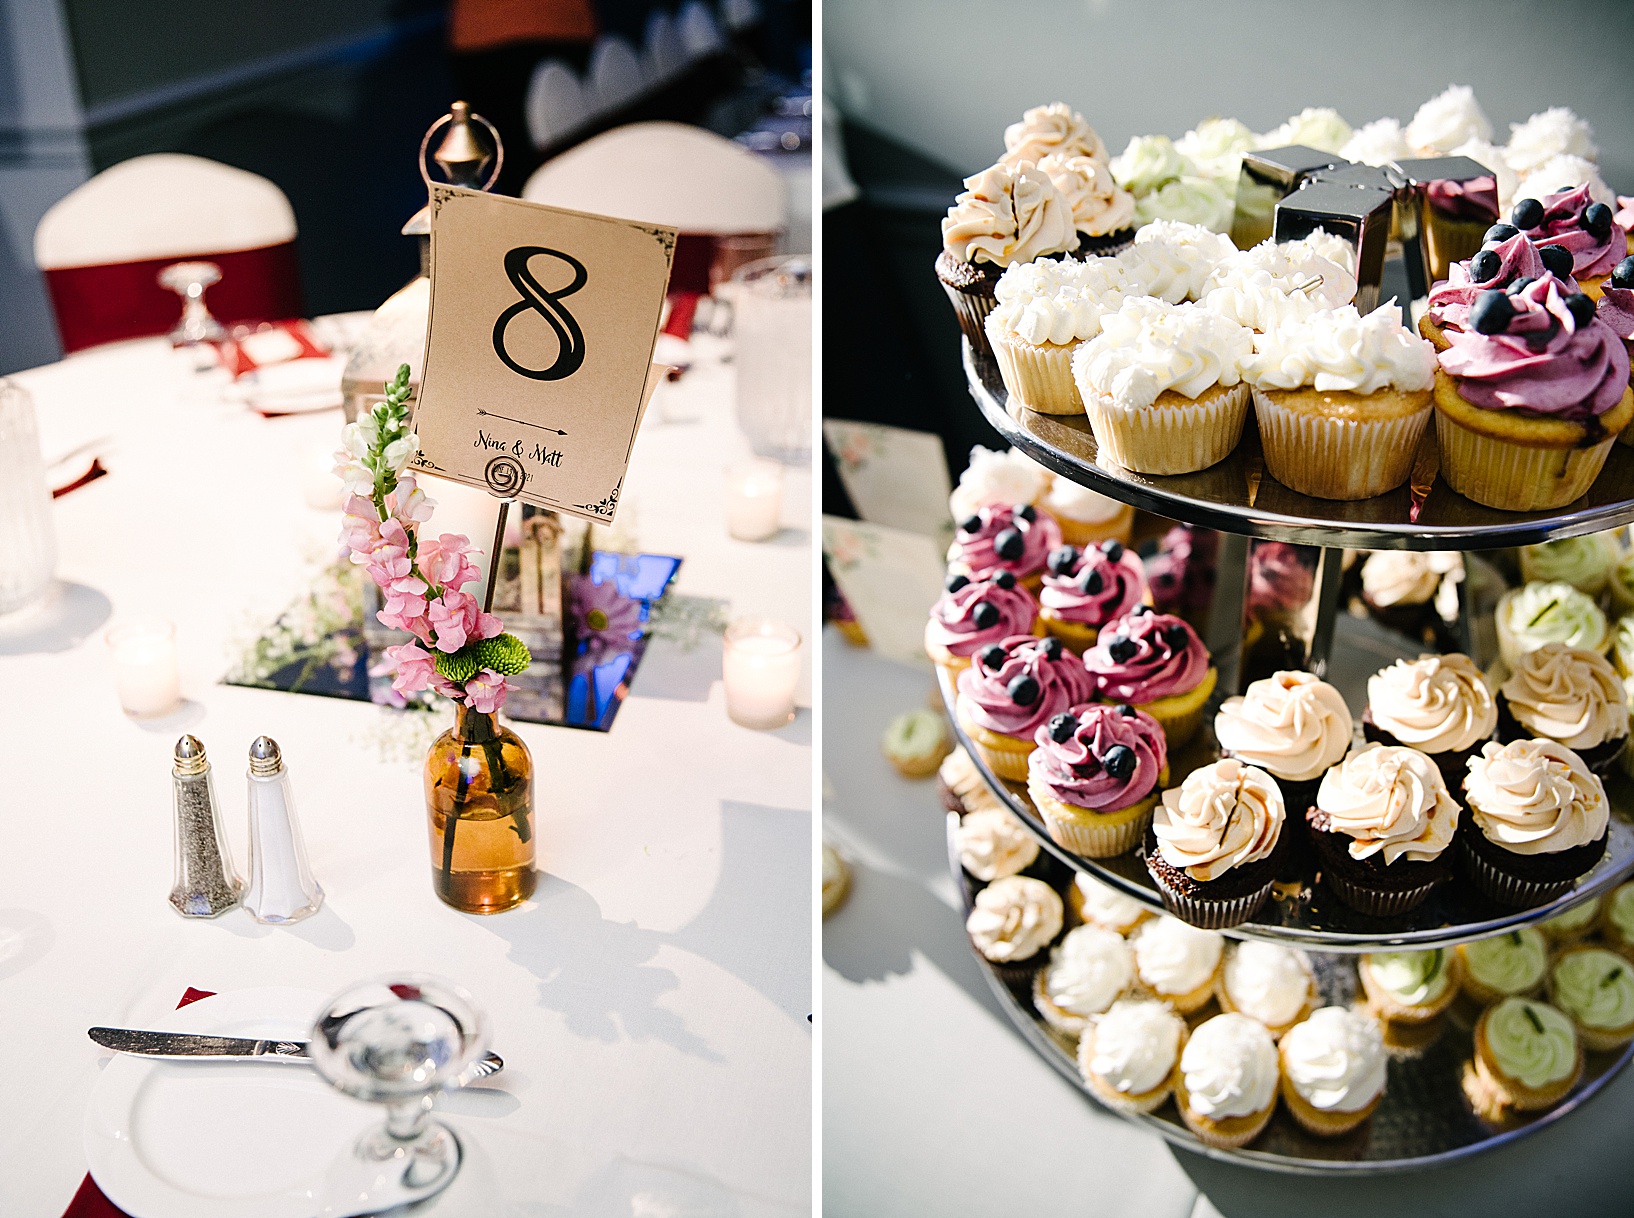 An assortment of different types and colors of wedding cupcakes